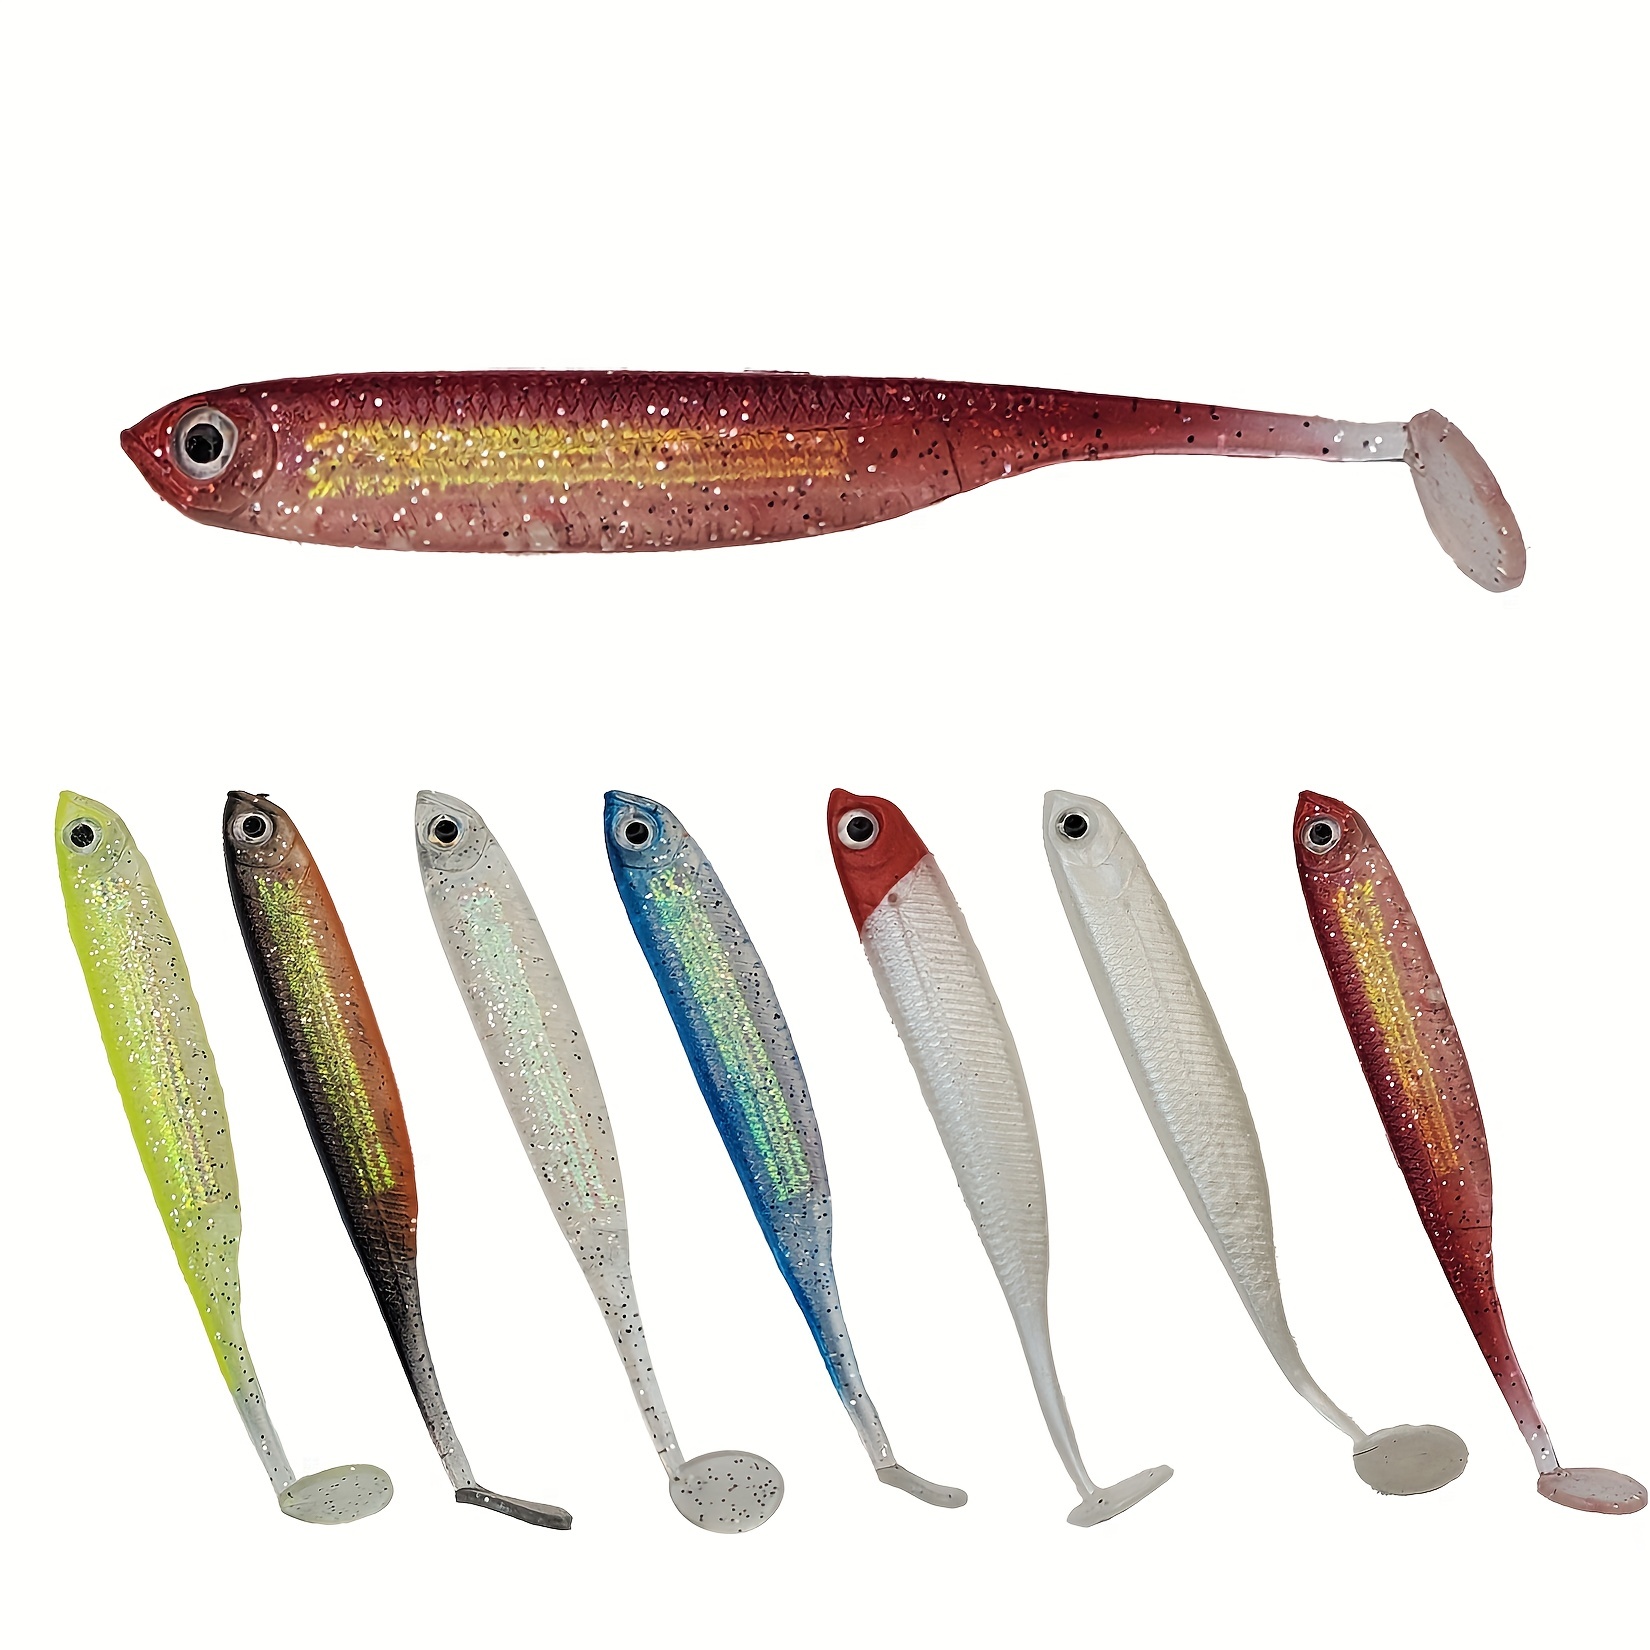 Funzhan Fishing Soft Lures for Bass Artificial Plastic Baits Paddle Tail  Swimbaits Creature Shad Proven Colors Natural Oils Portable Box for Crappie